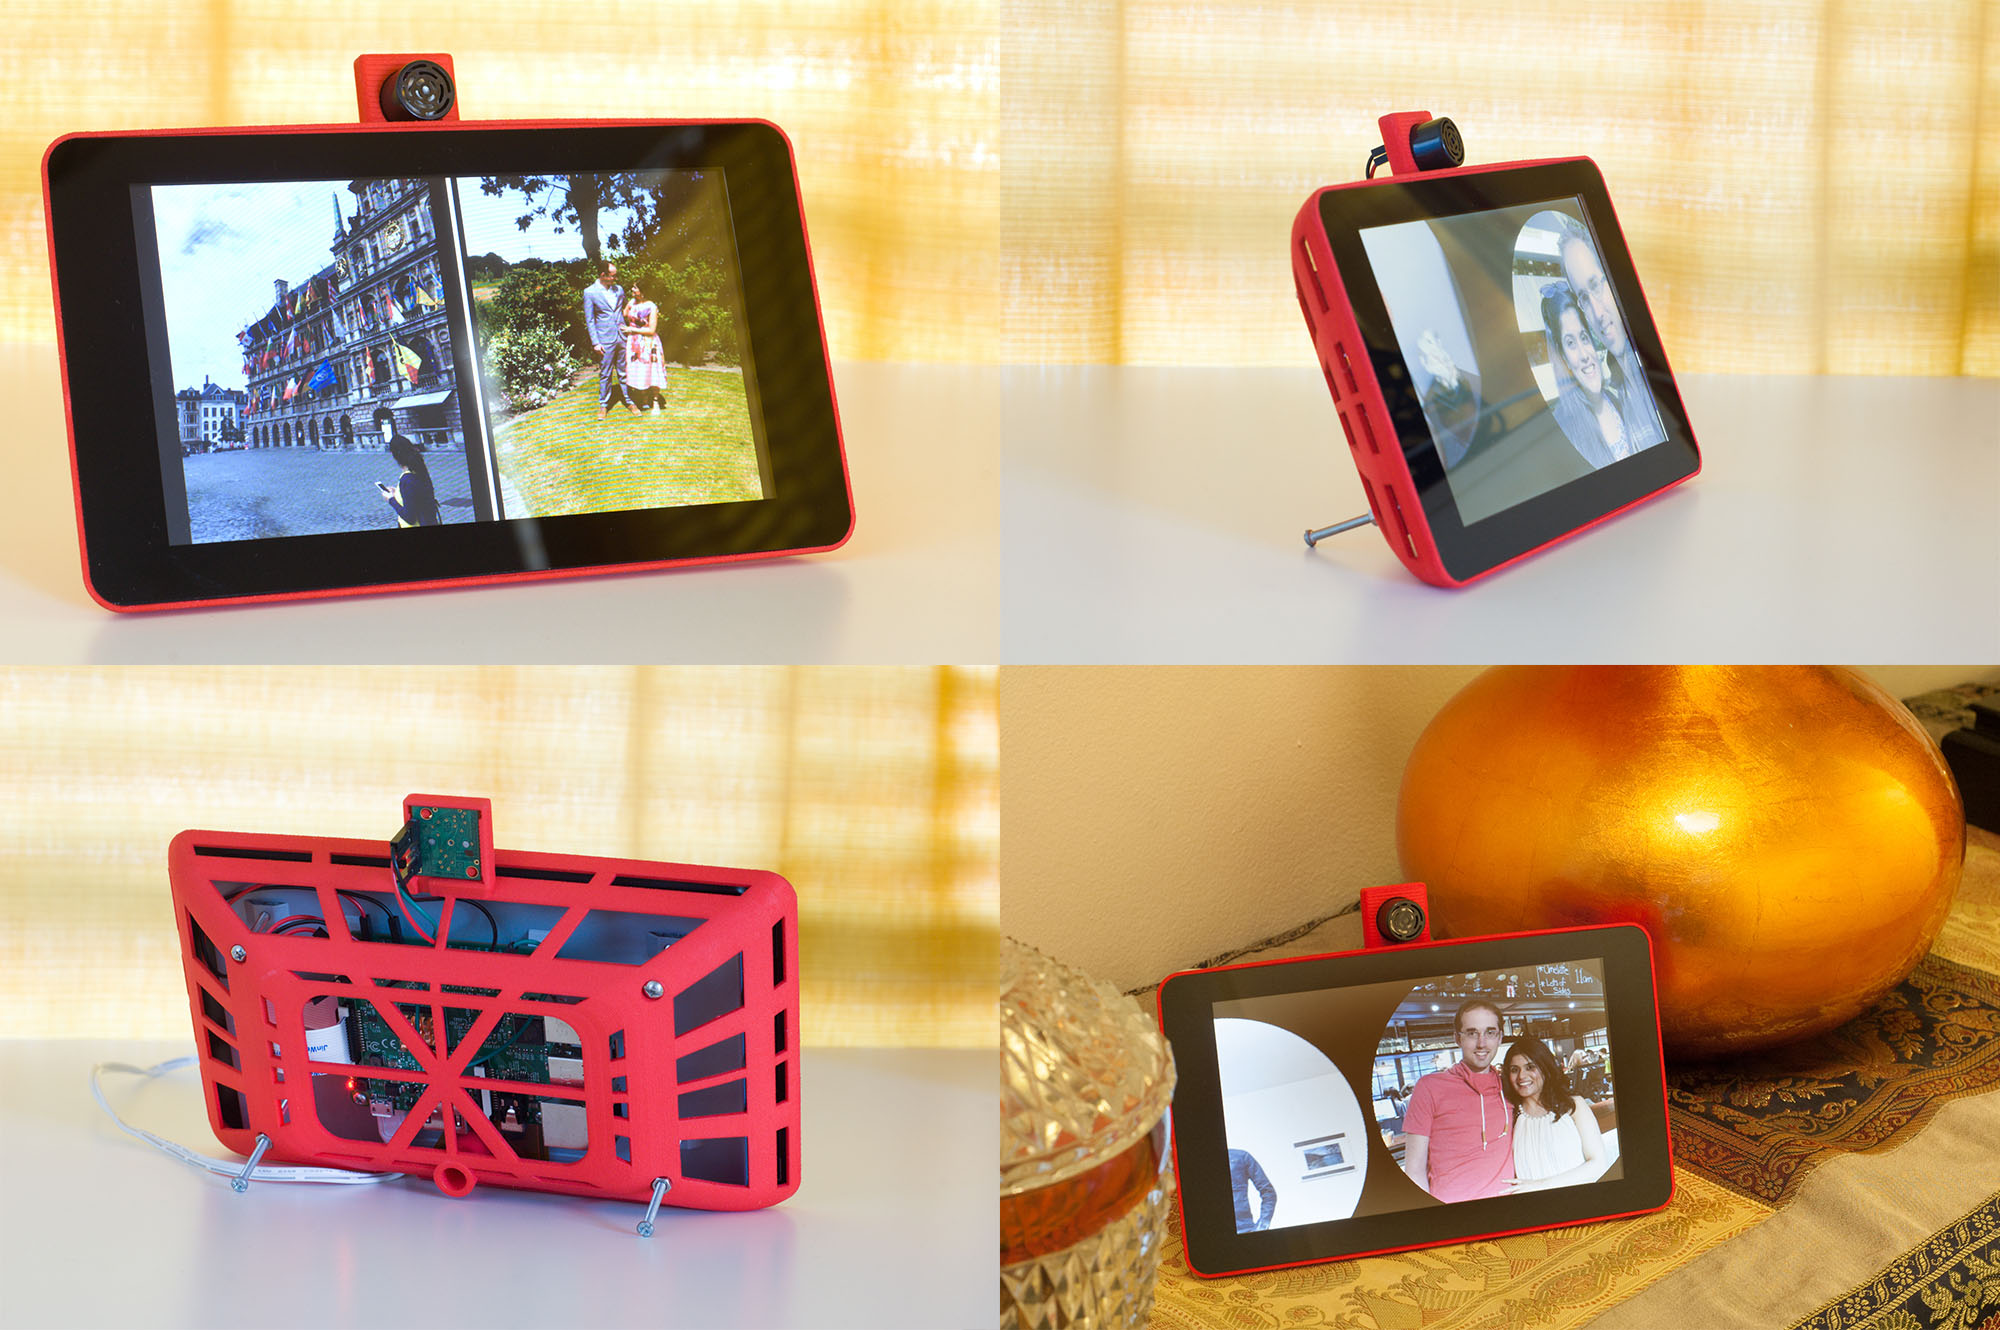 four photos of the device from different angles, showing a display with a black bezel and a bright red casing